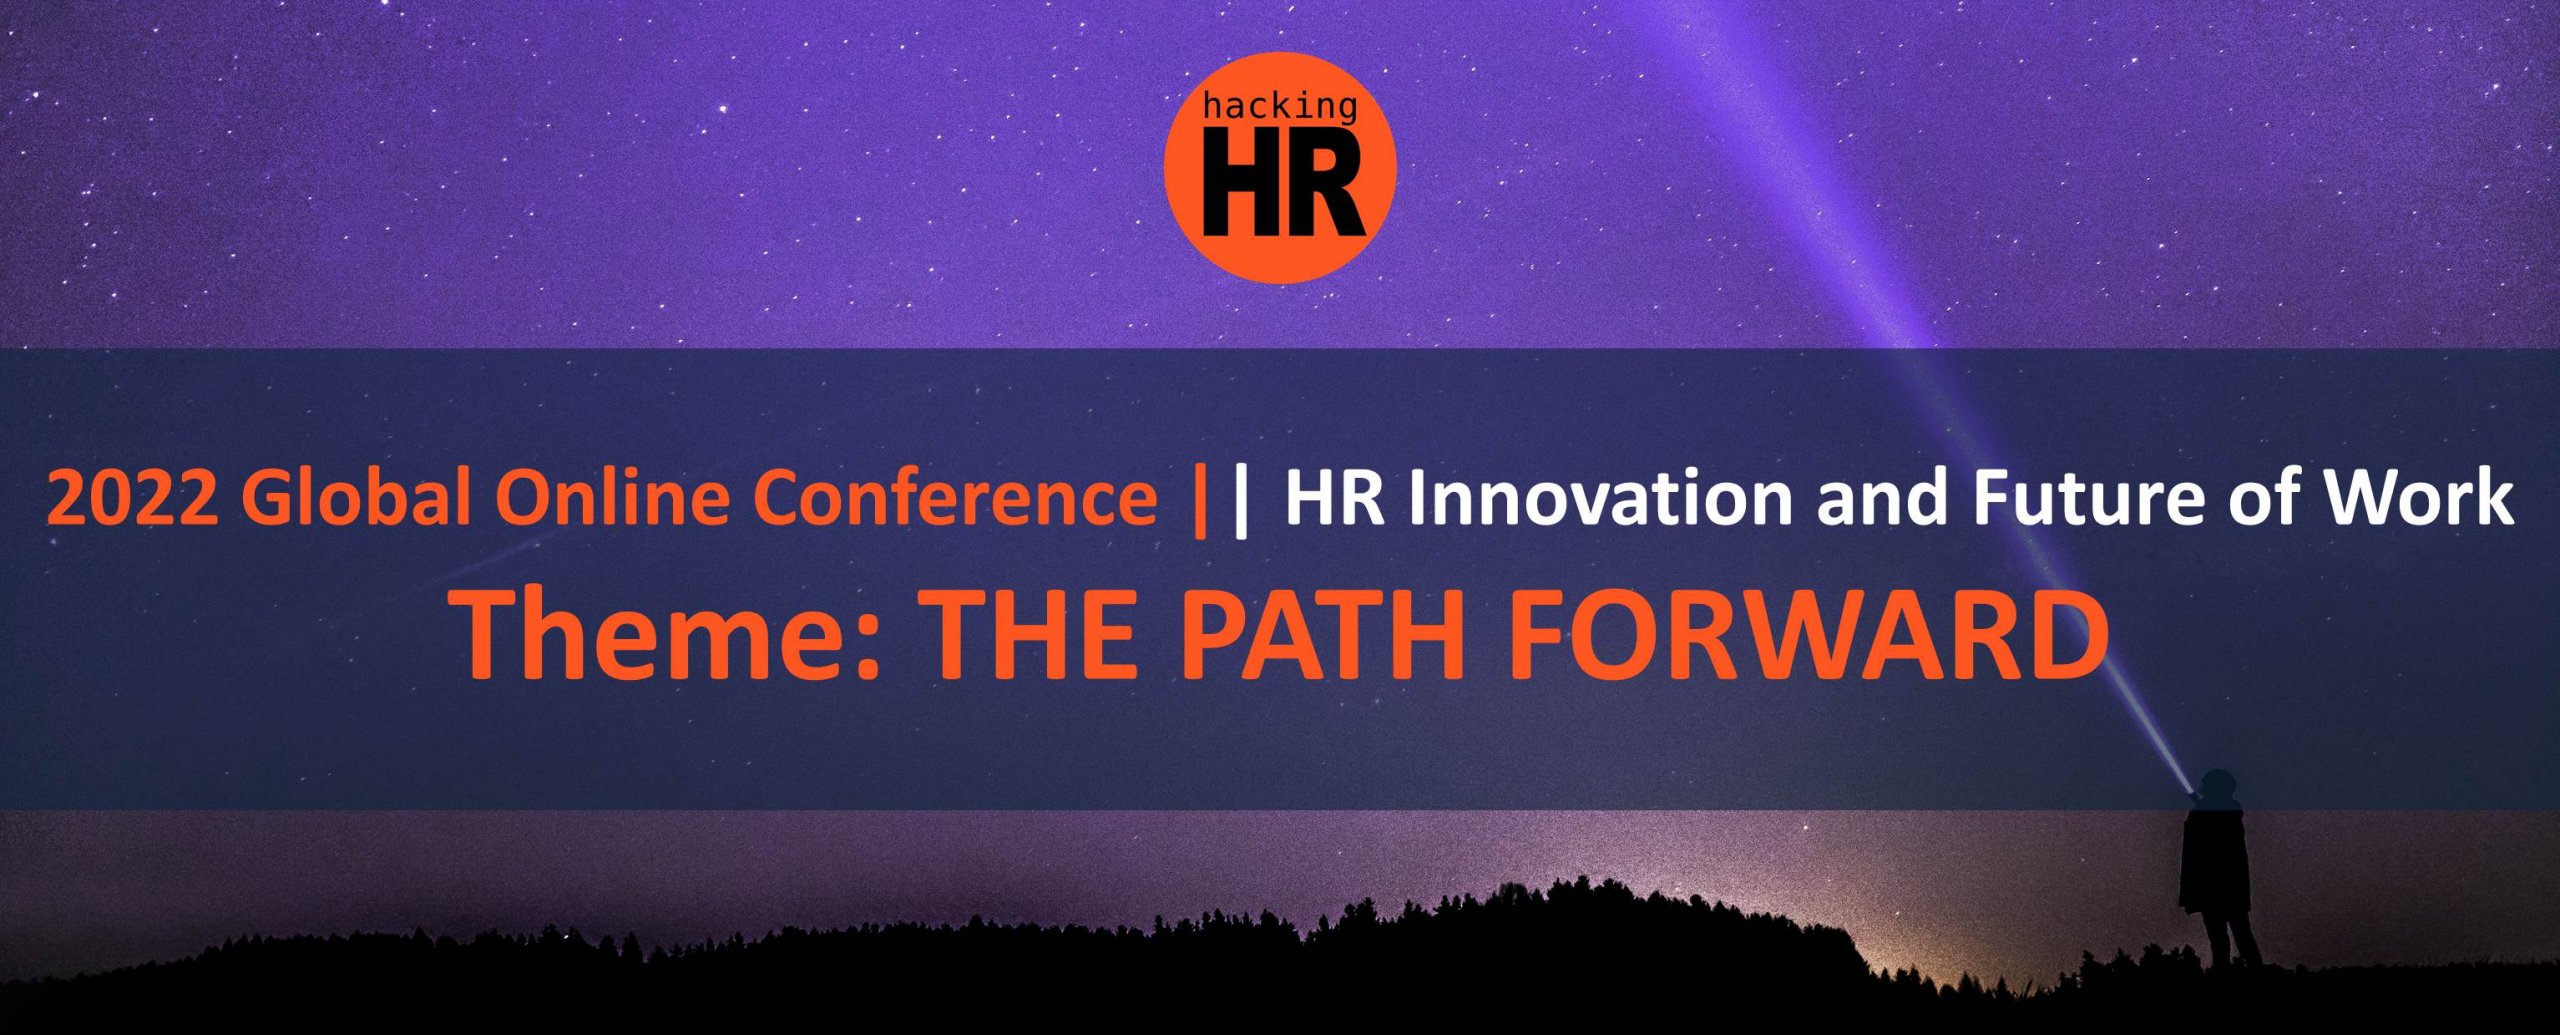 HR Innovation and Future of Work Panel of Speakers